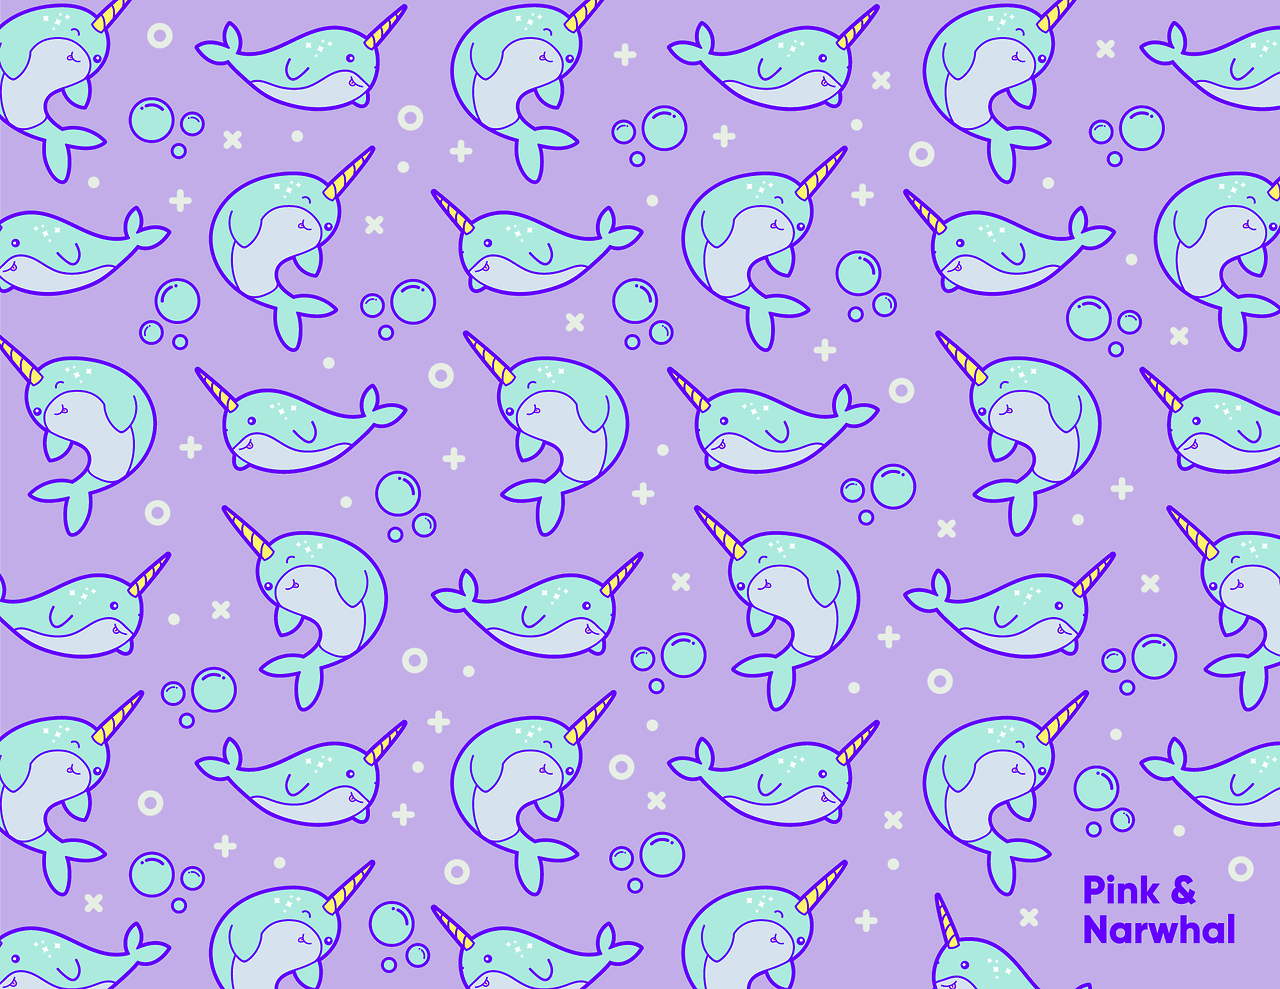 Pink Narwhal Wallpaper I Decided To Post This While